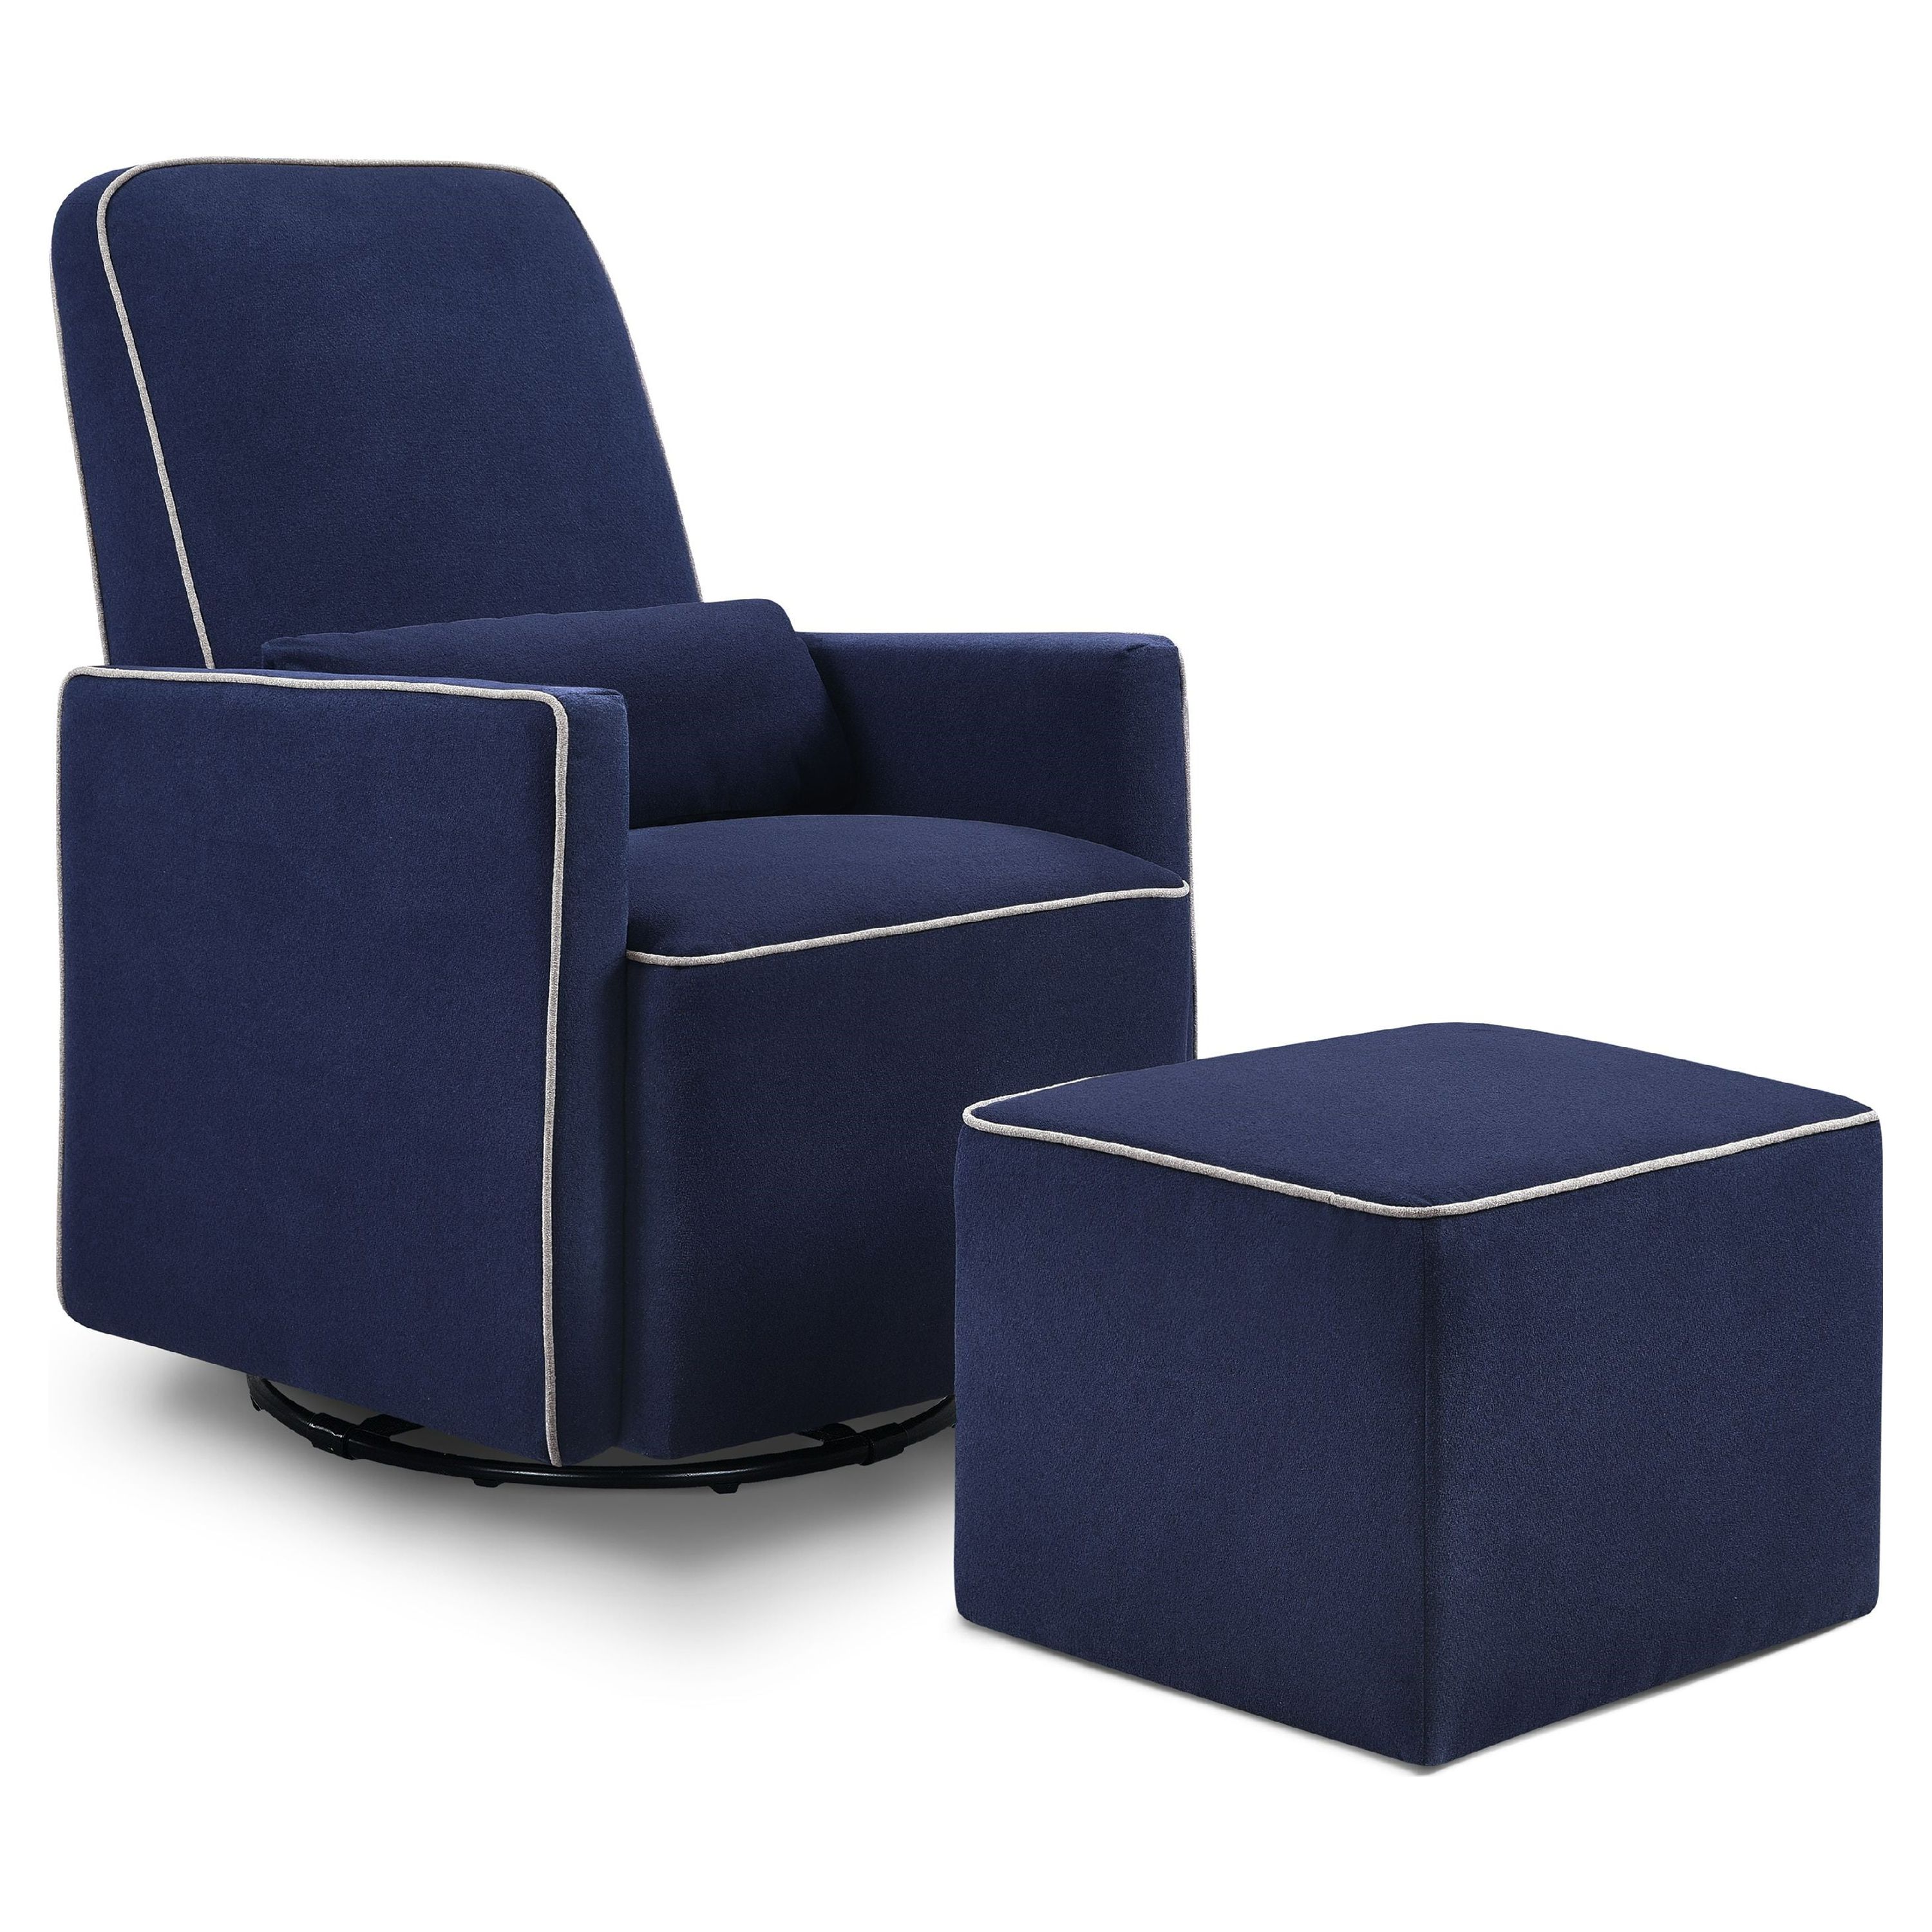 DaVinci Baby Olive Glider and Ottoman, Navy and Grey - image 1 of 10